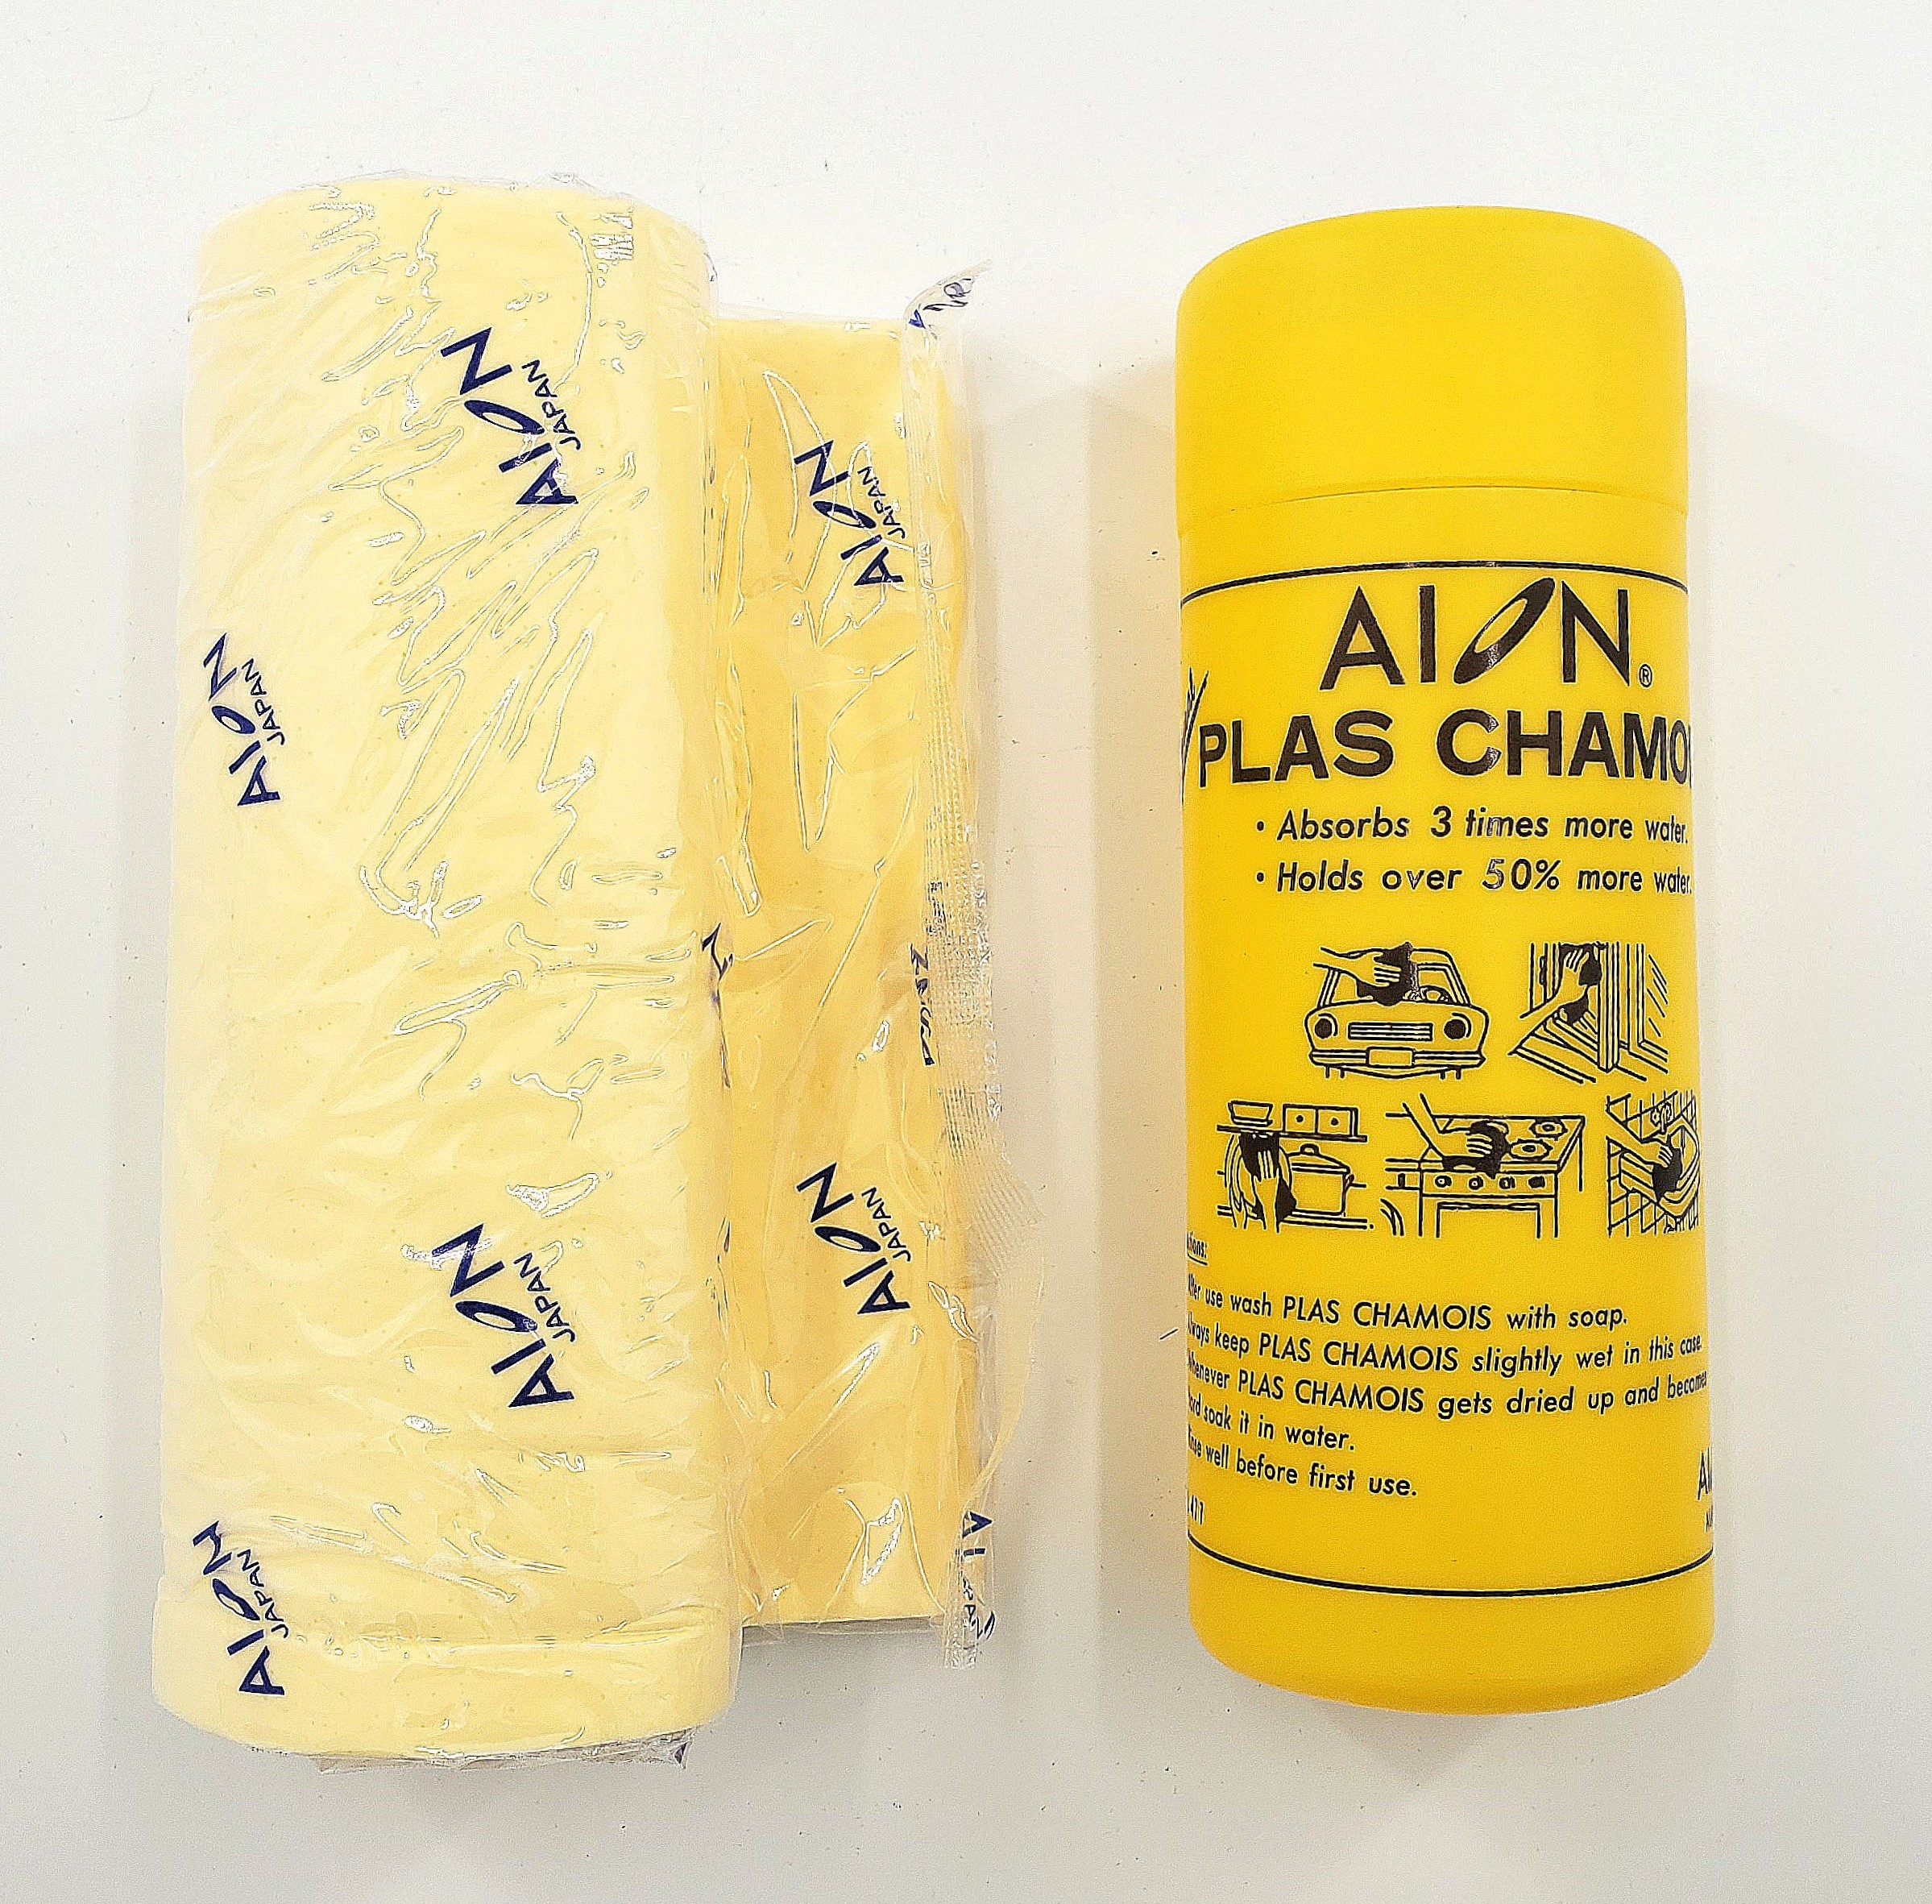 Aion Plas Chamois Formerly Kanebo Car Wash Cleaning Cloth Magic Towel